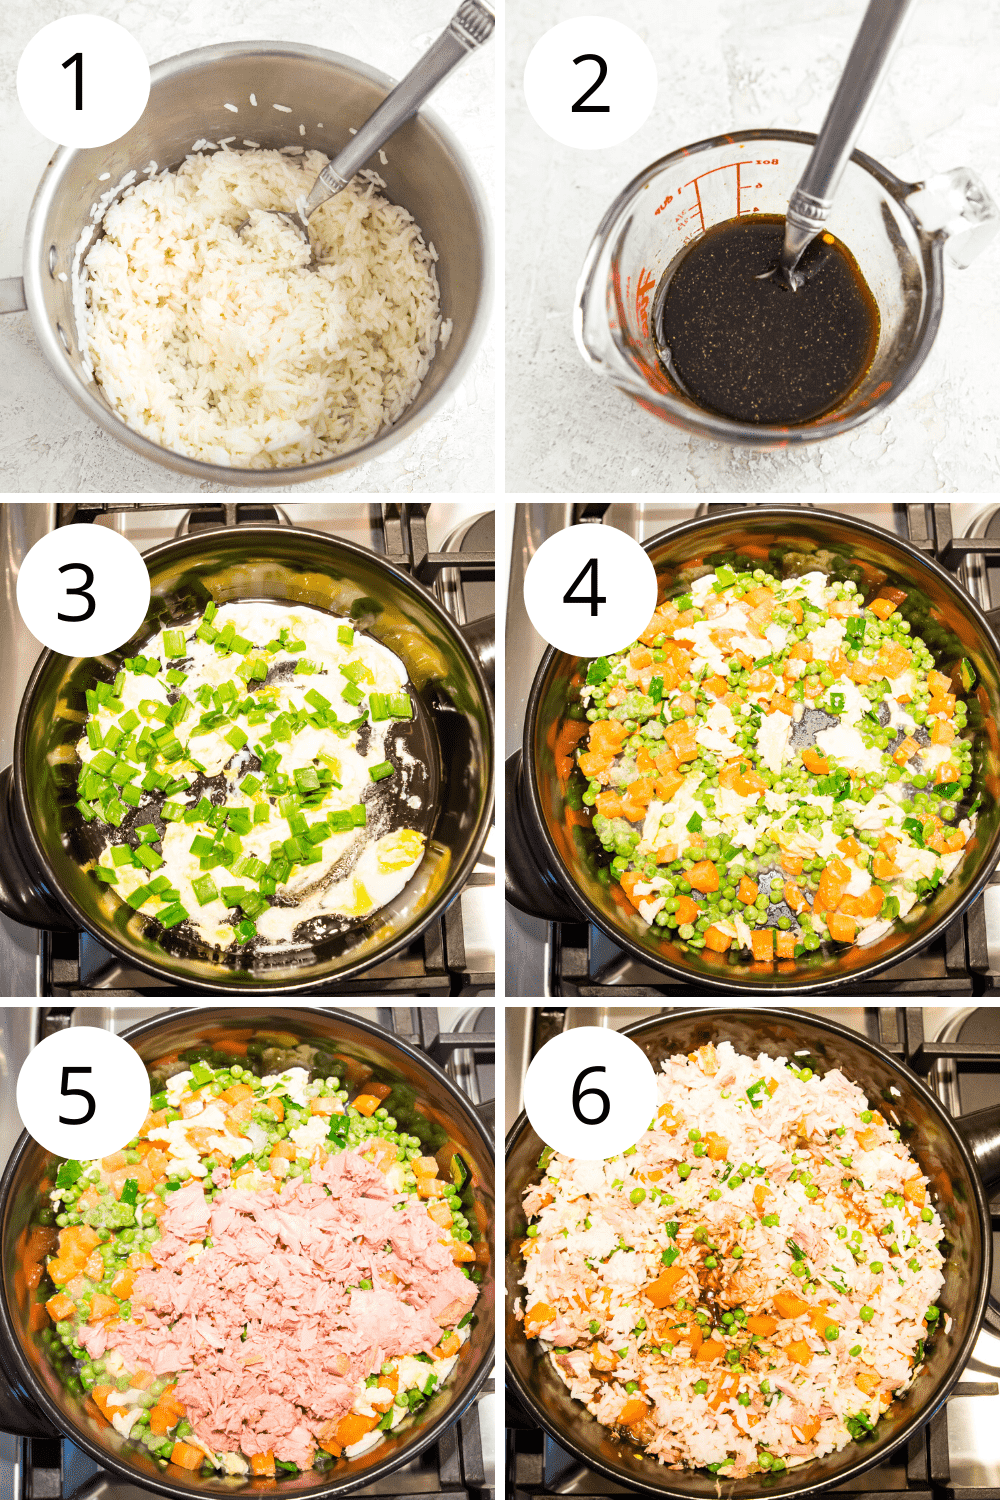 Step by step directions for making tuna fried rice on the stovetop.